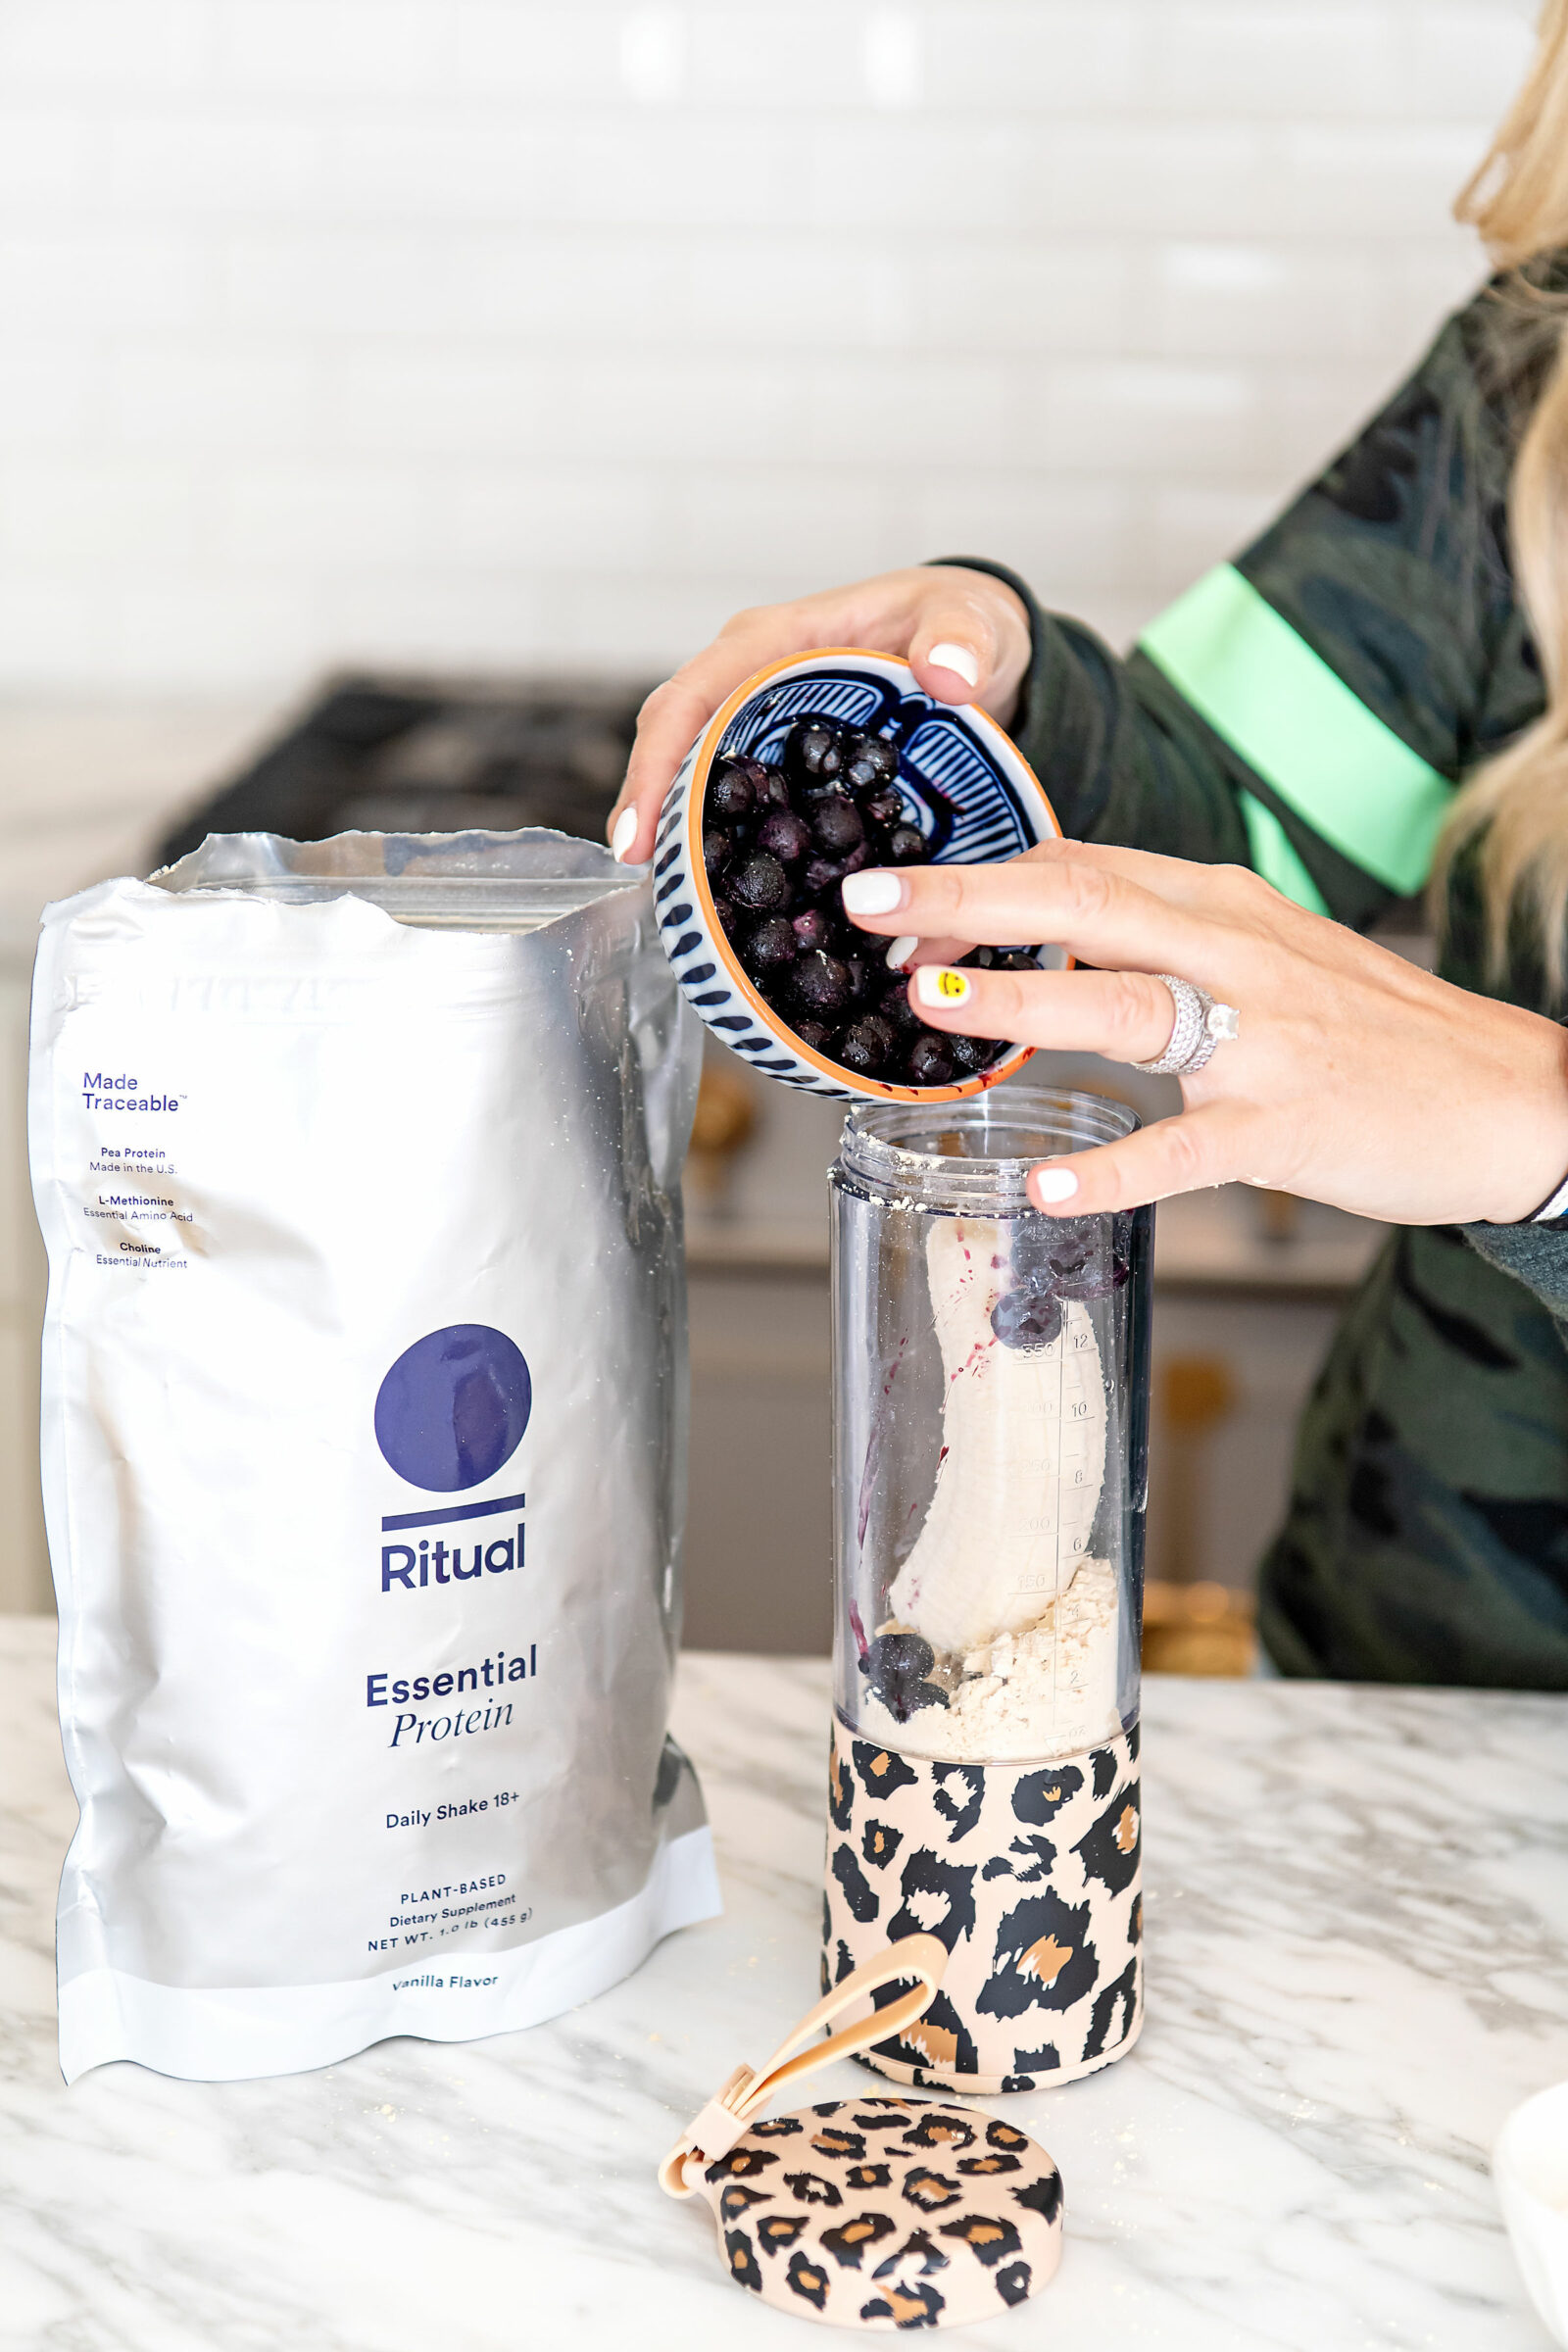 Healthy Living by popular Houston lifestyle blog, The House of Fancy: image of a woman wearing a camo top and putting ritual powder, blueberries and a banana in a leopard print cup. 